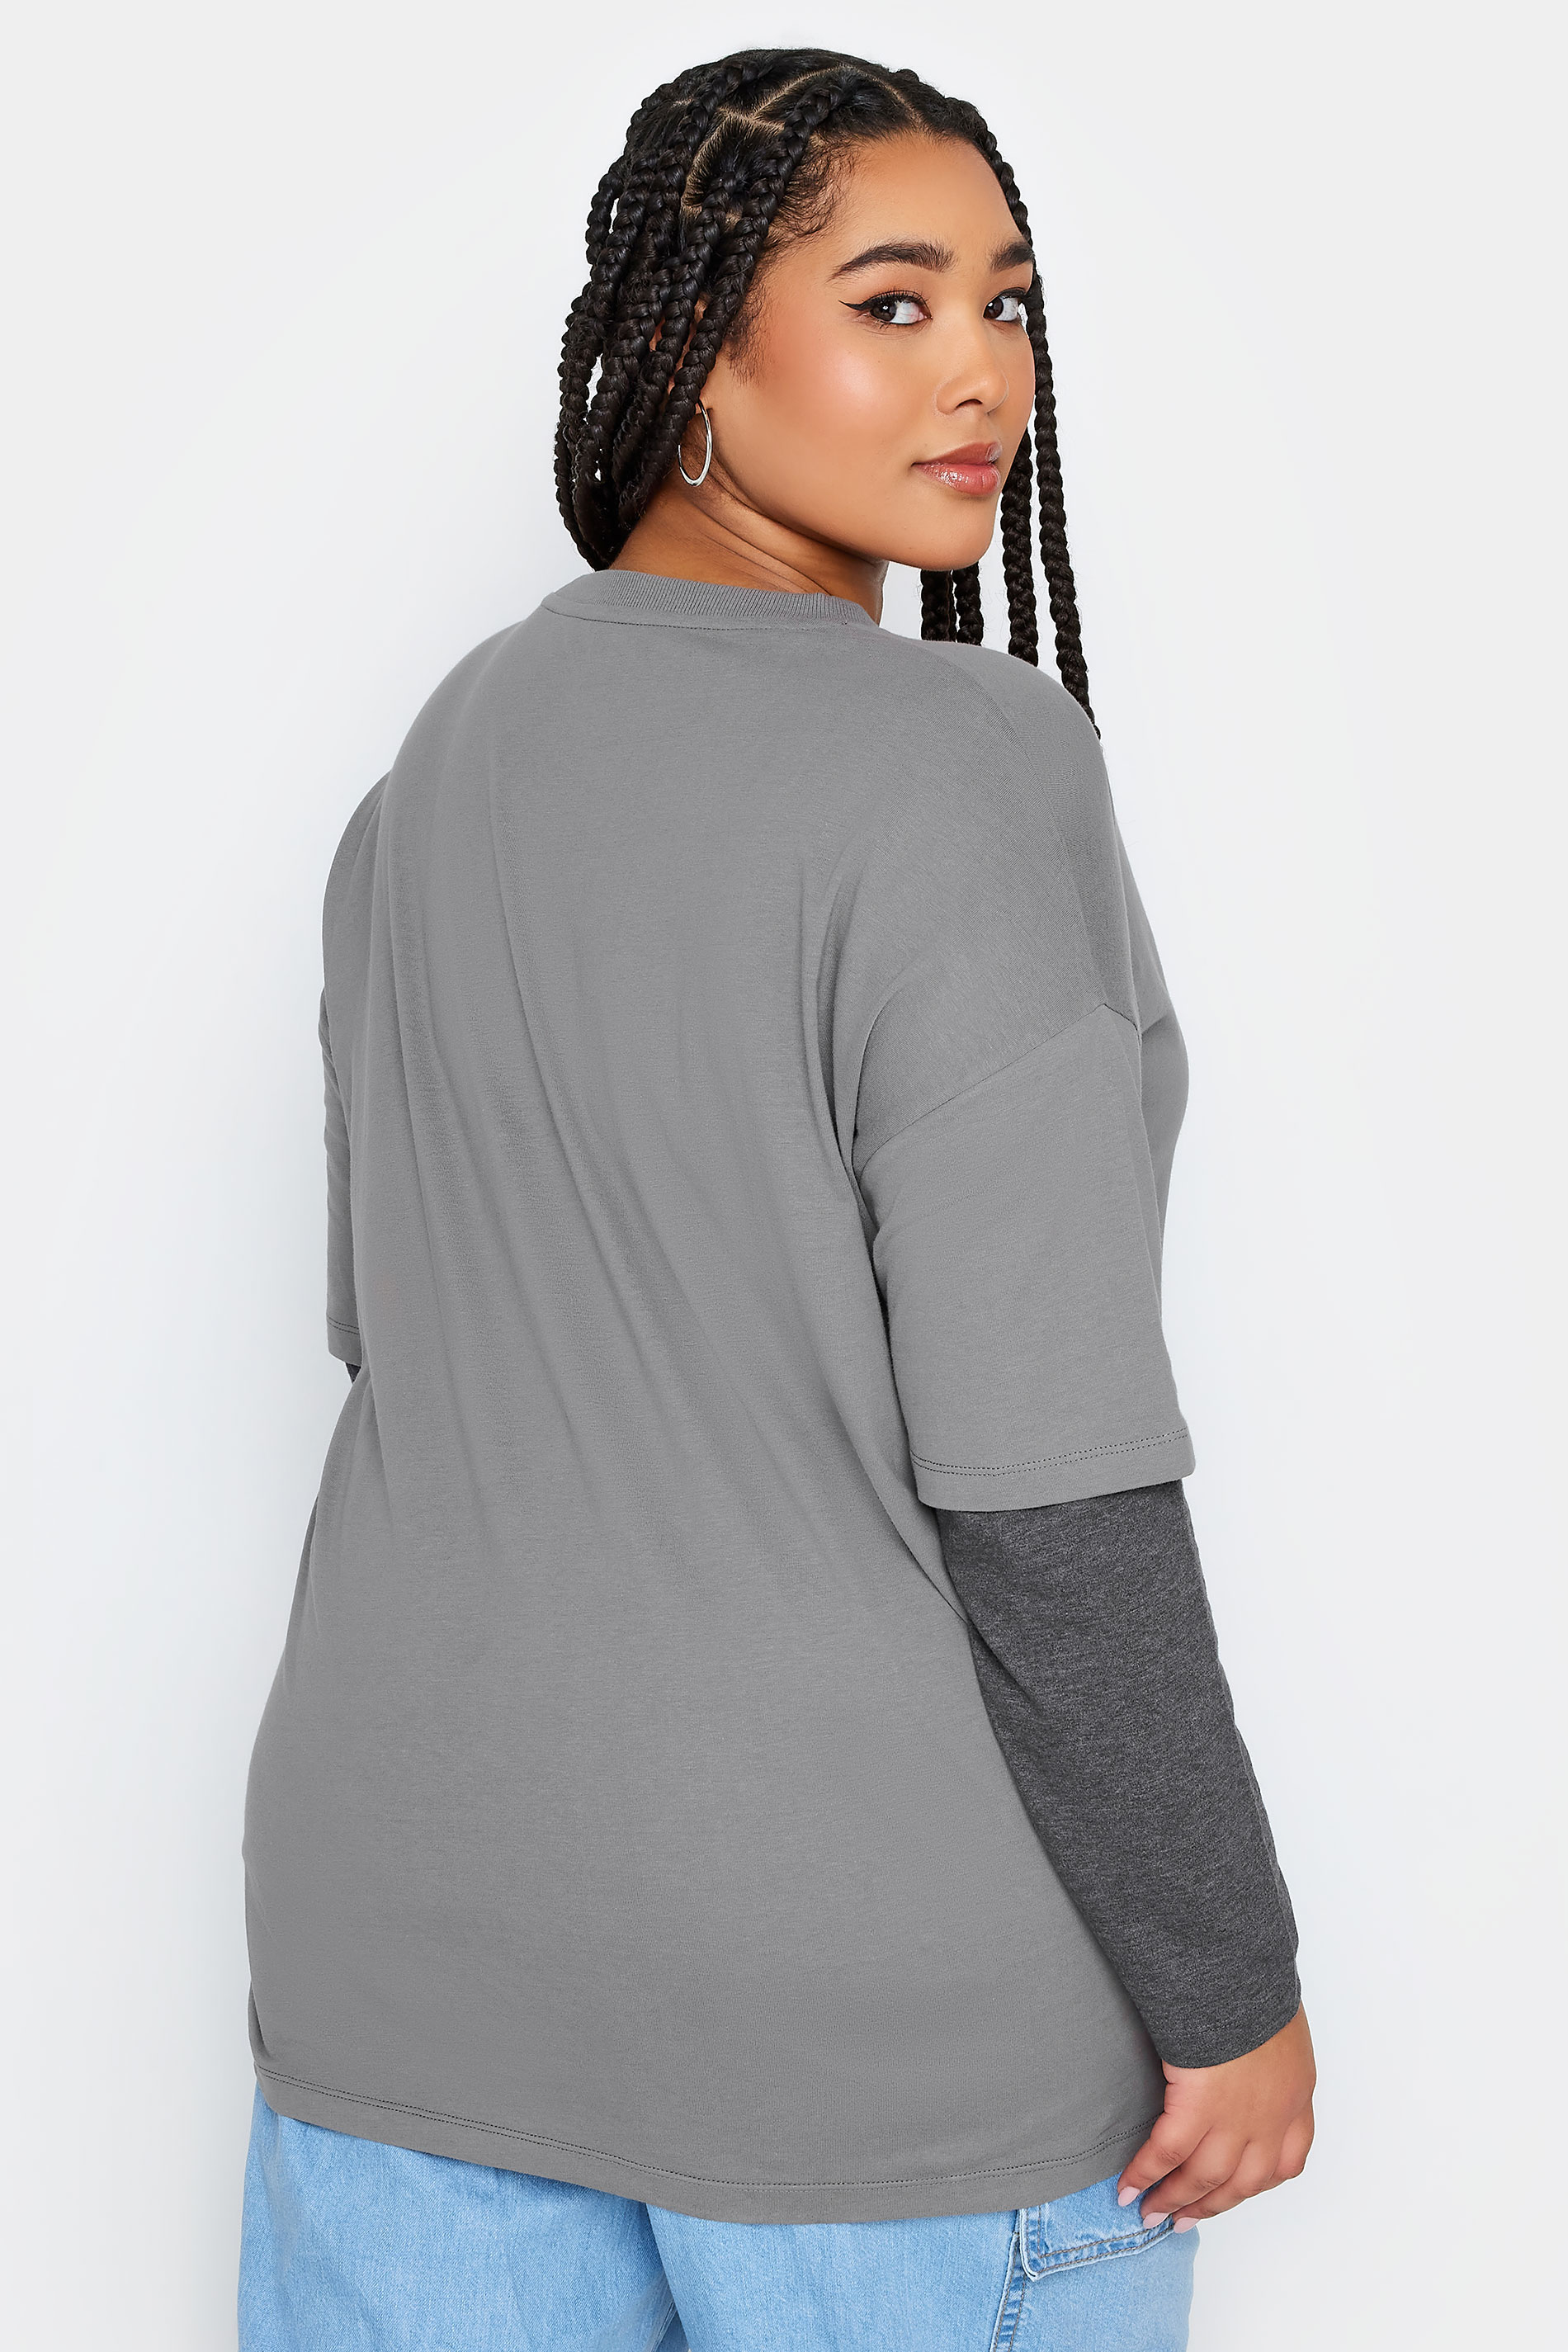 YOURS Plus Size Grey 2 In 1 Flame Heart Print Top 3